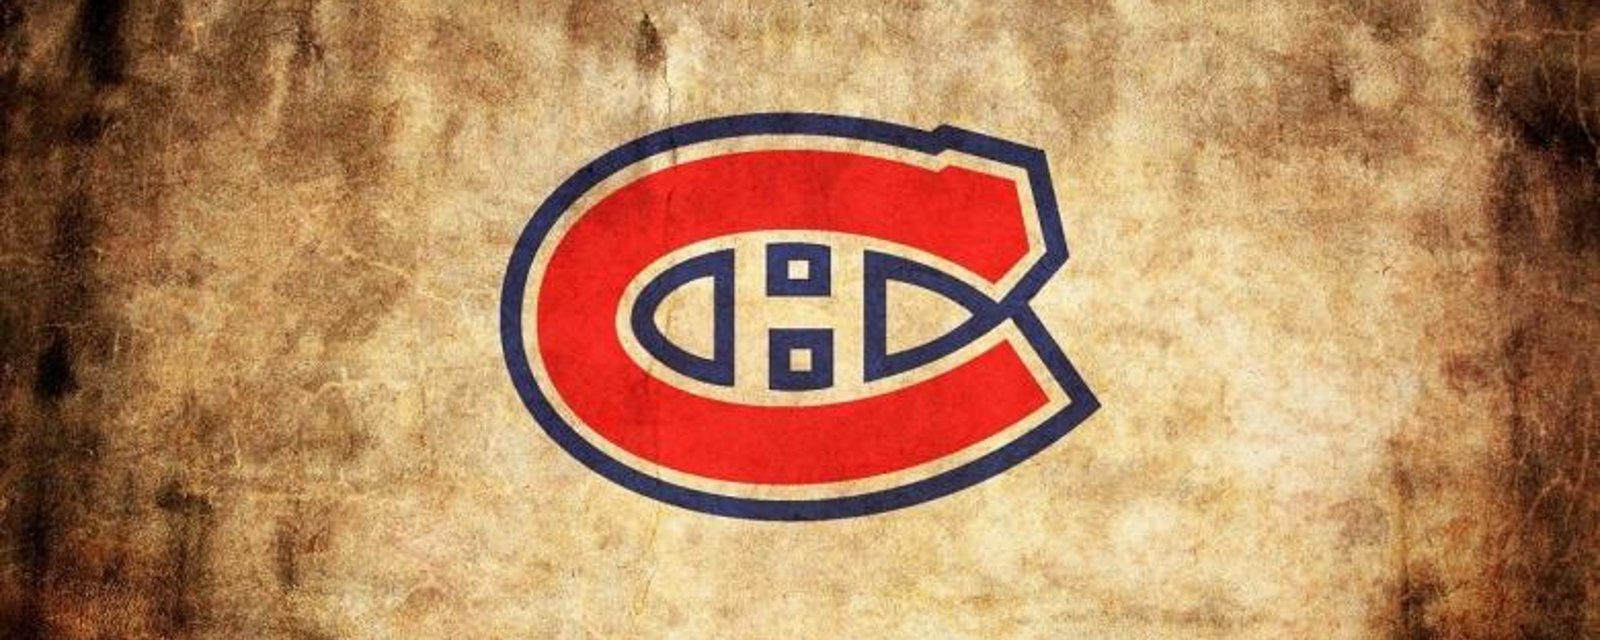 Curious firing within the Habs organization raises many questions.